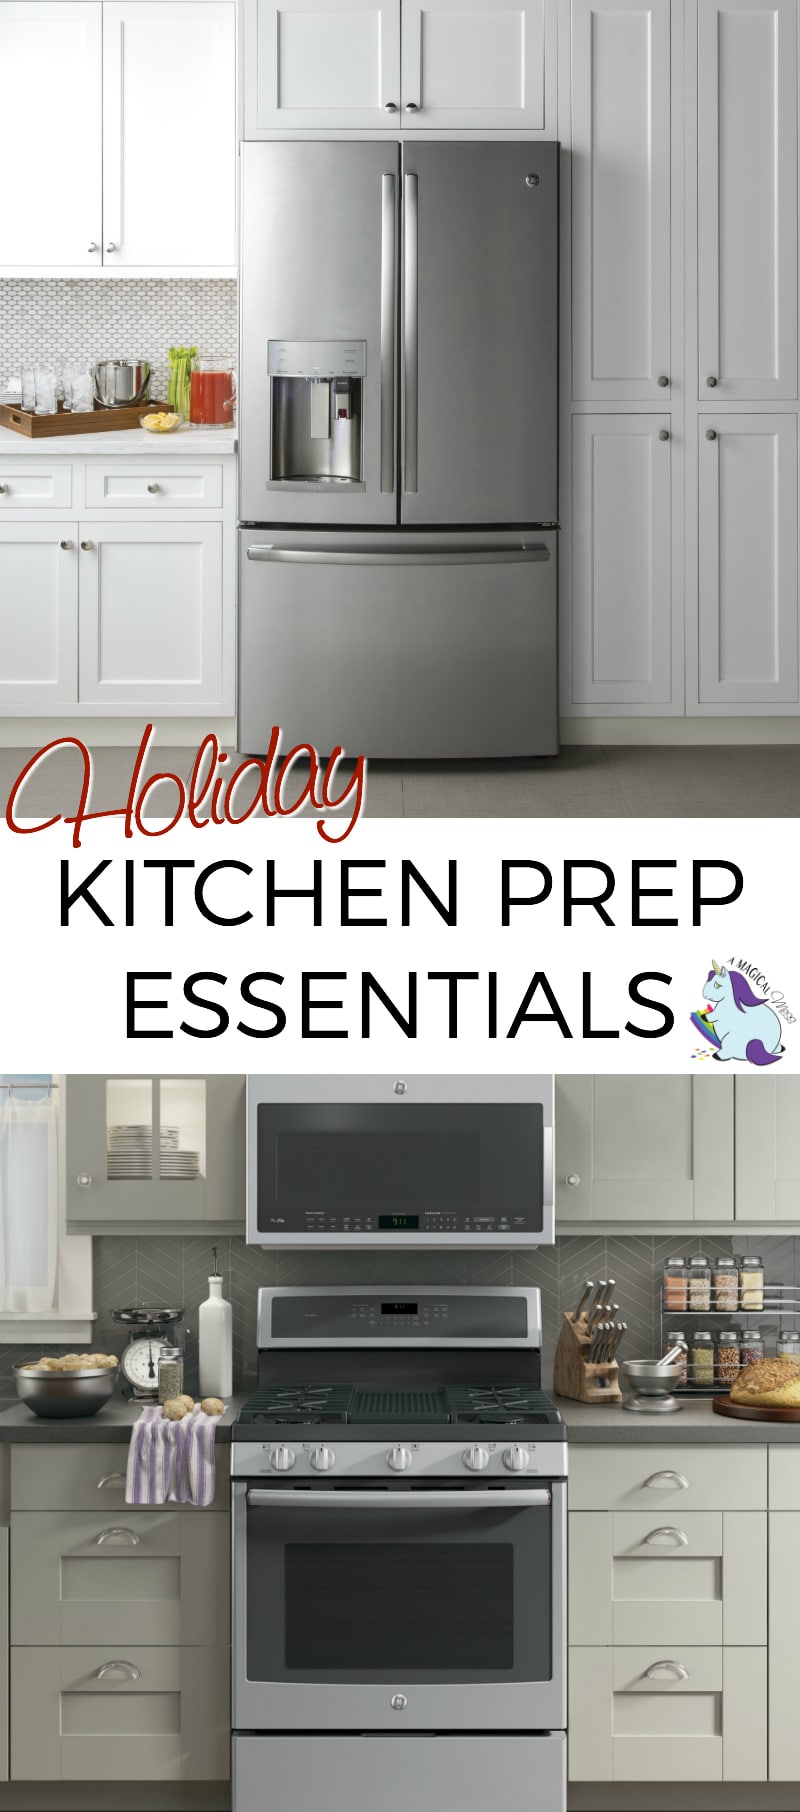 The Ultimate Holiday Kitchen Prep Essentials to Reduce Stress and Impress